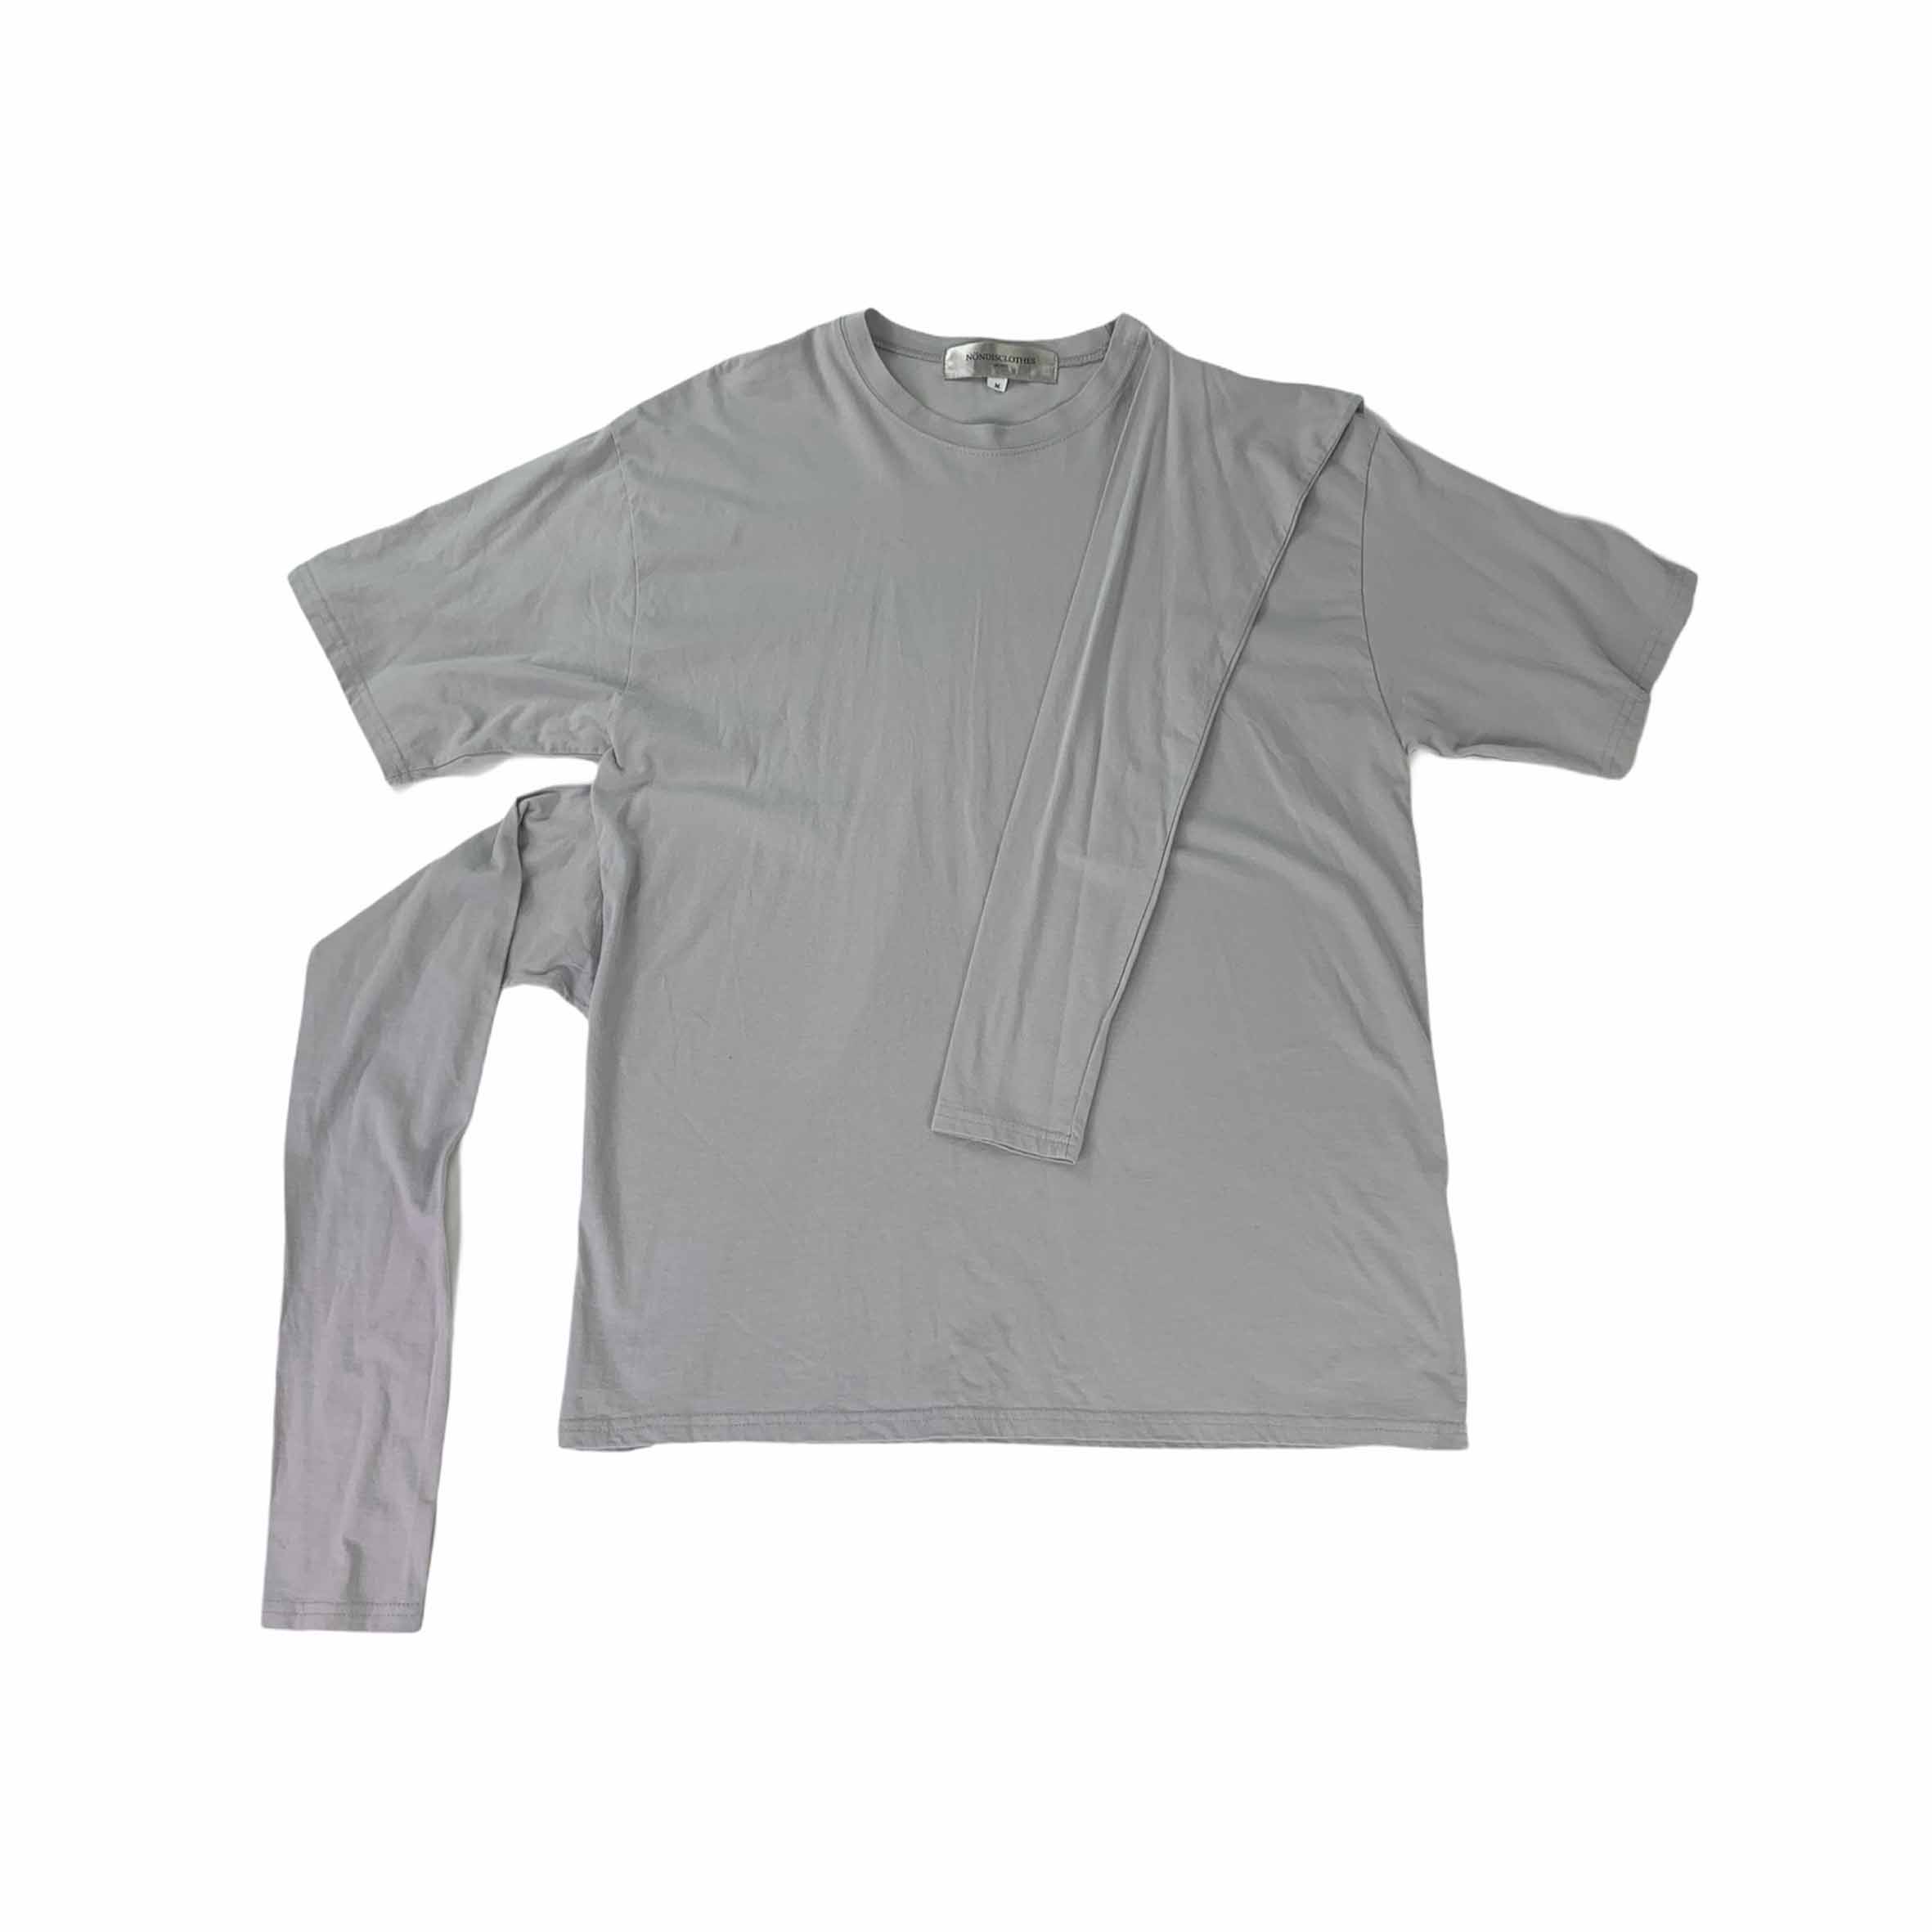 [Nondisclothes] Archive Tshirt with Extra Sleeve GR - Size M